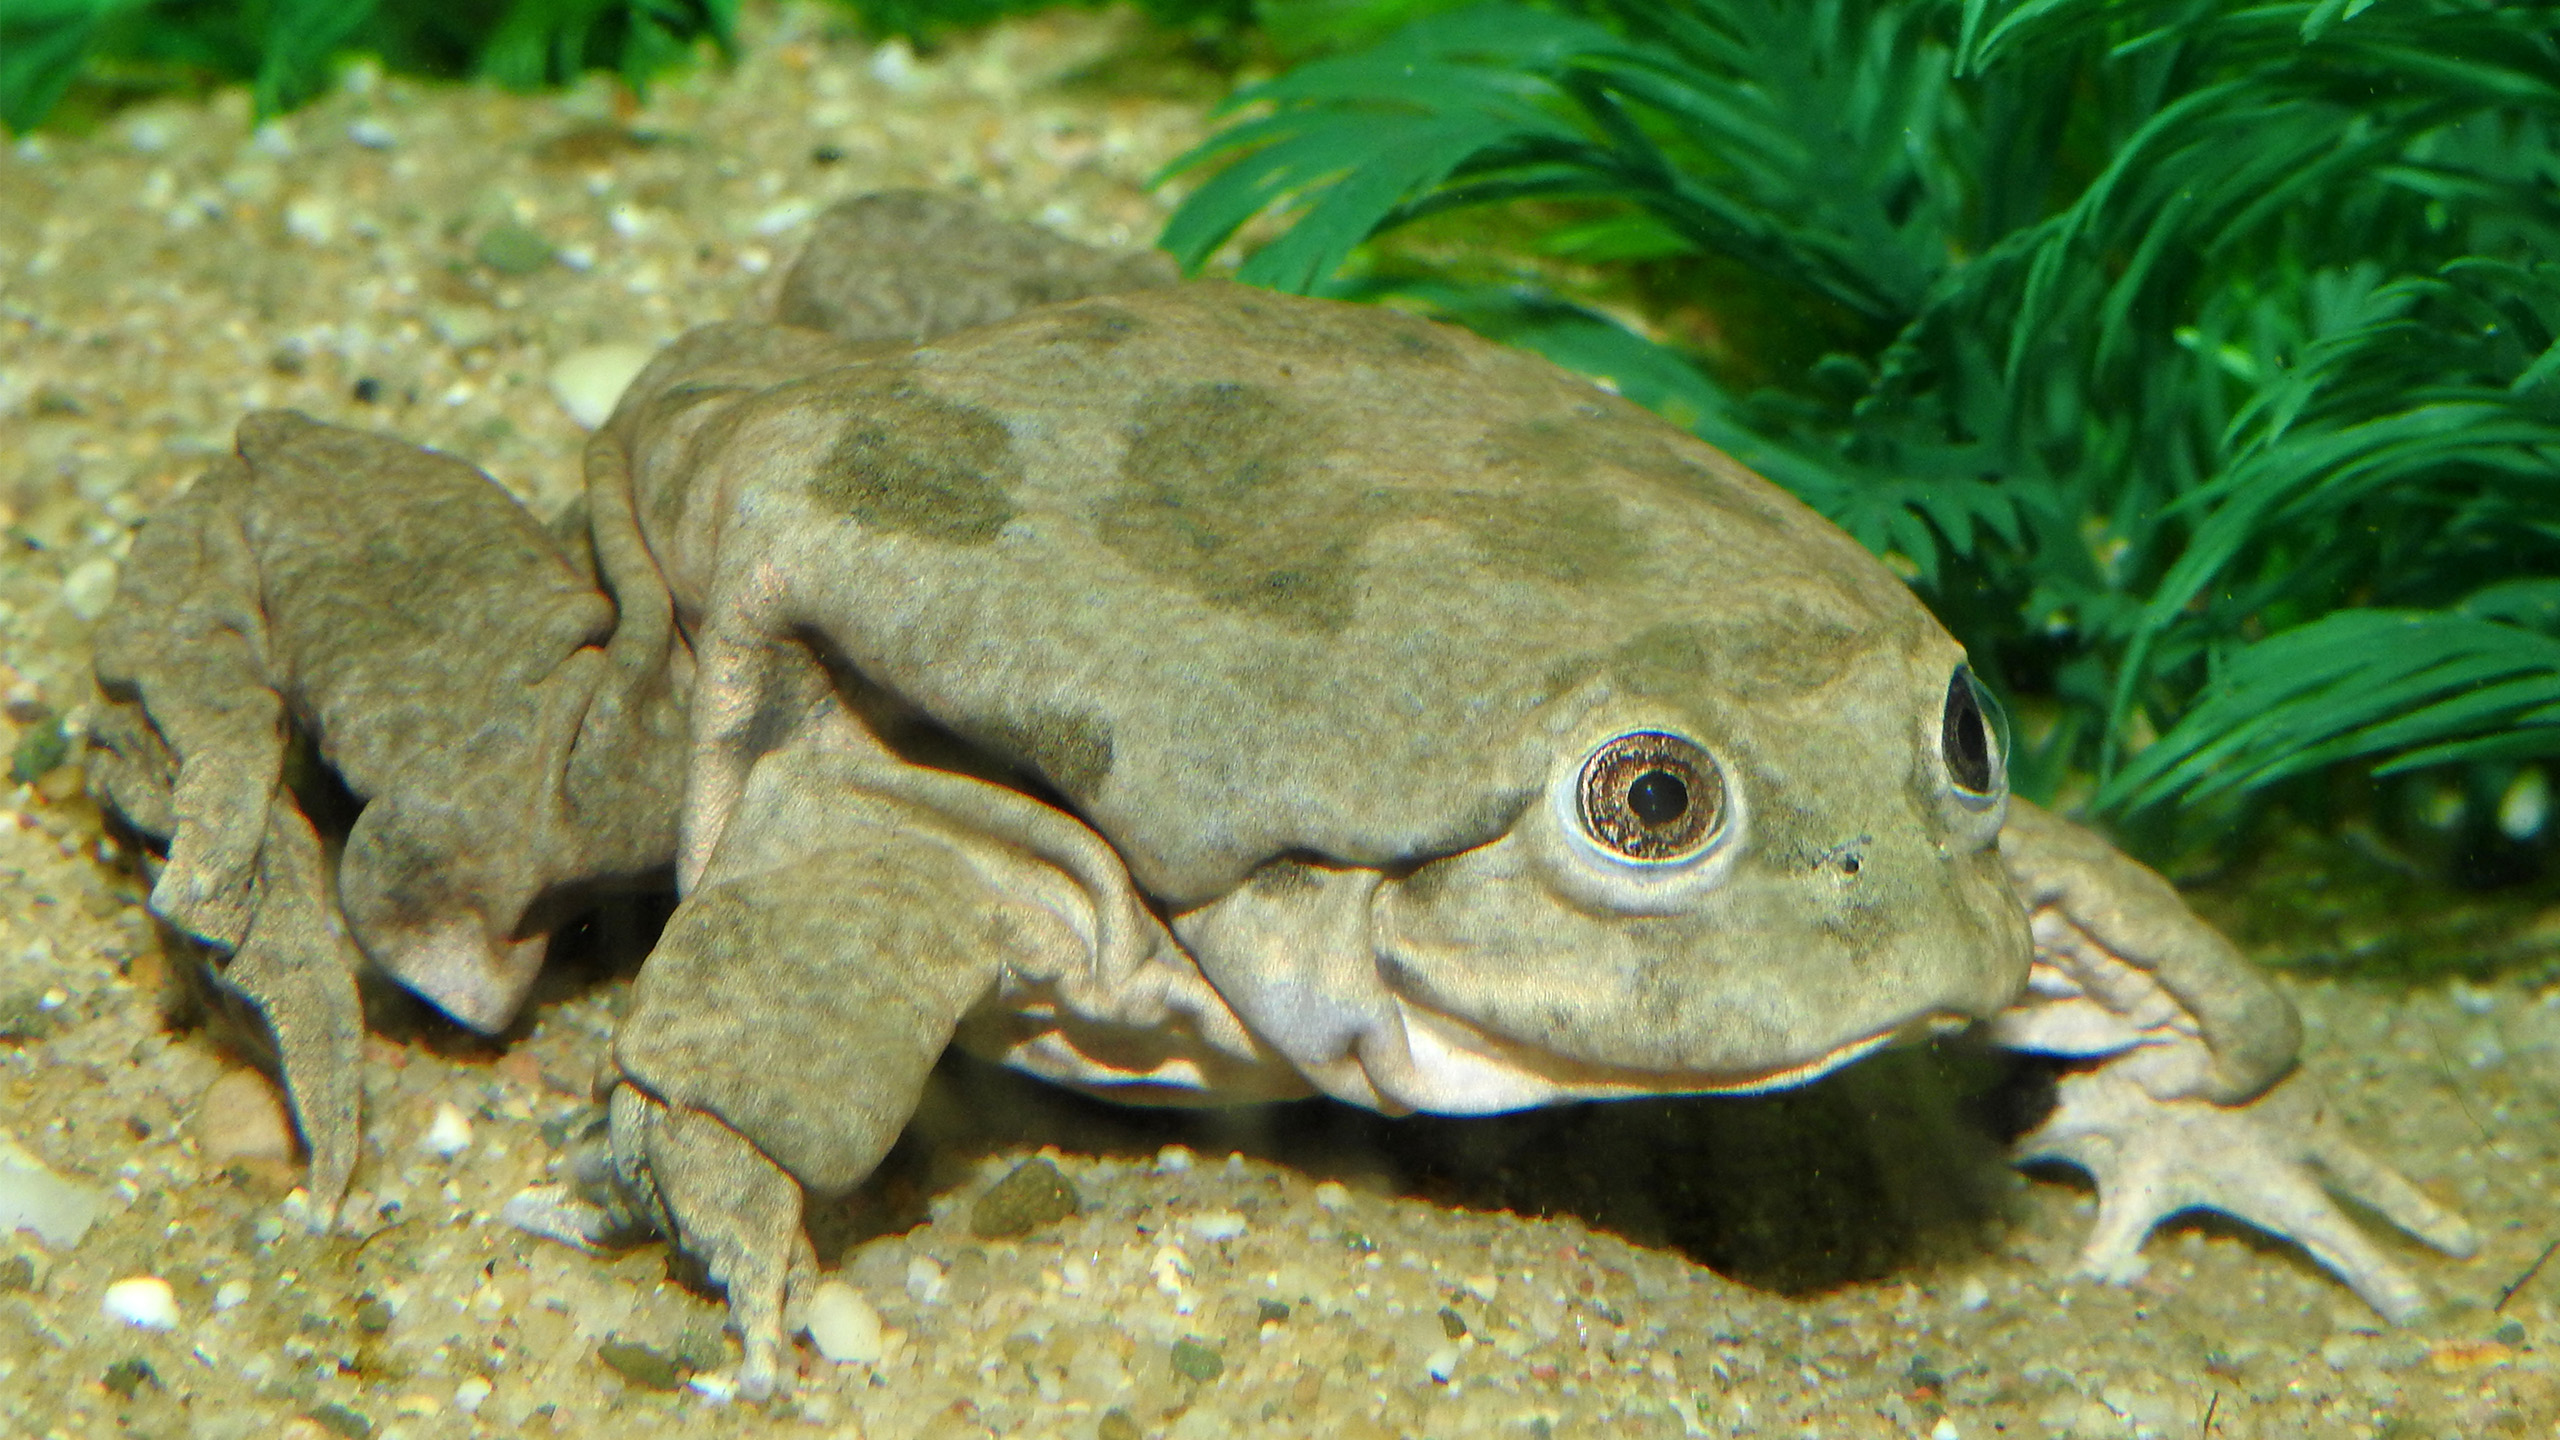 A character frog – private keepers can also help build capacity to preserve it for the future in a united effort. | Aquazoo Löbbecke Museum